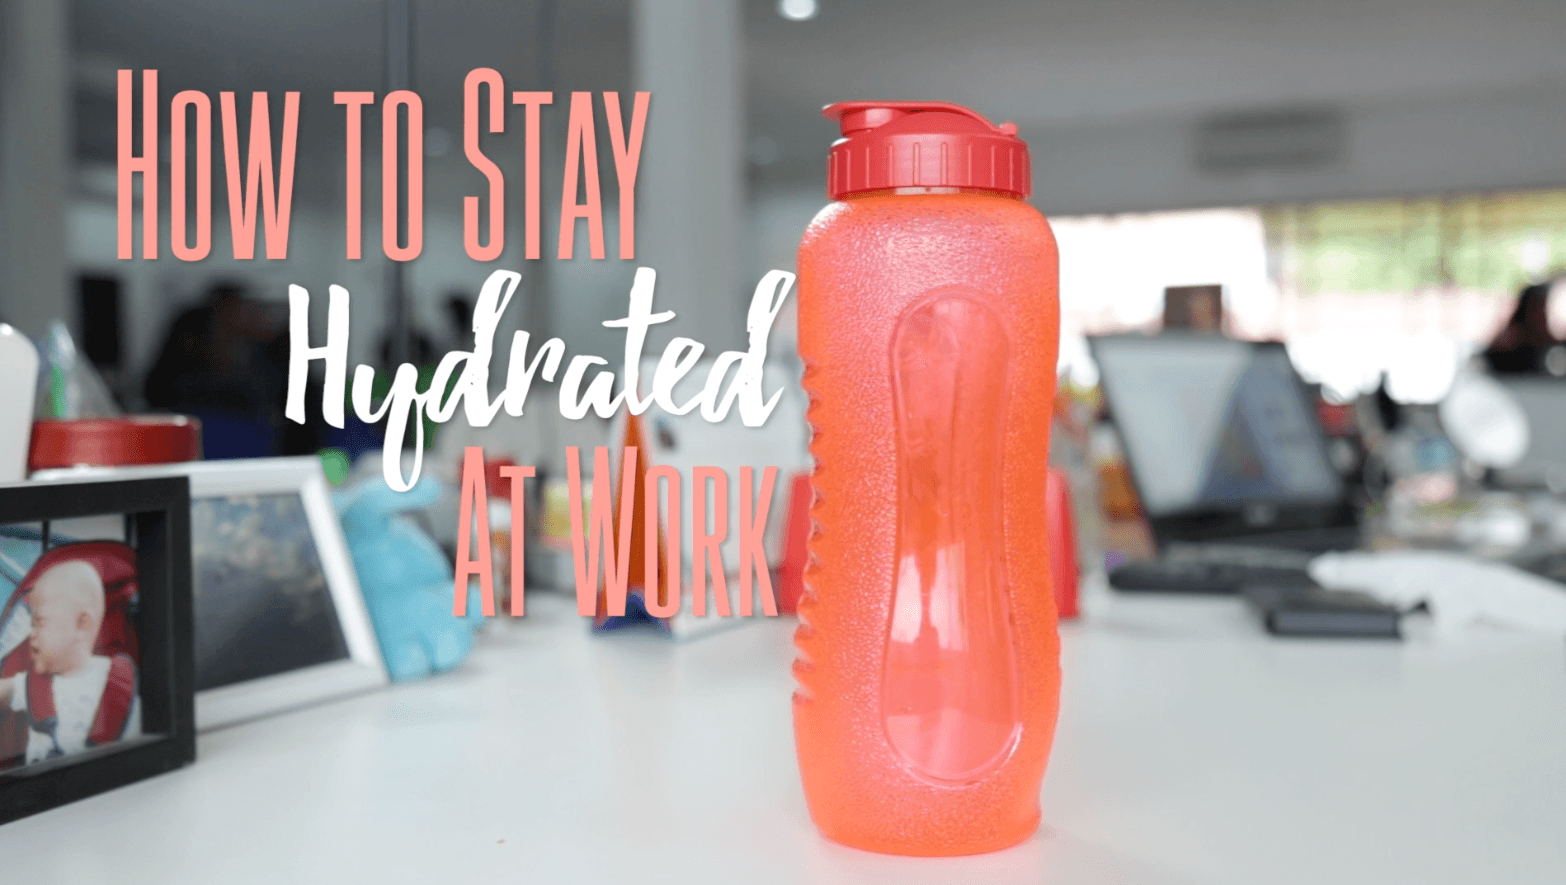 How To Stay Hydrated at Work